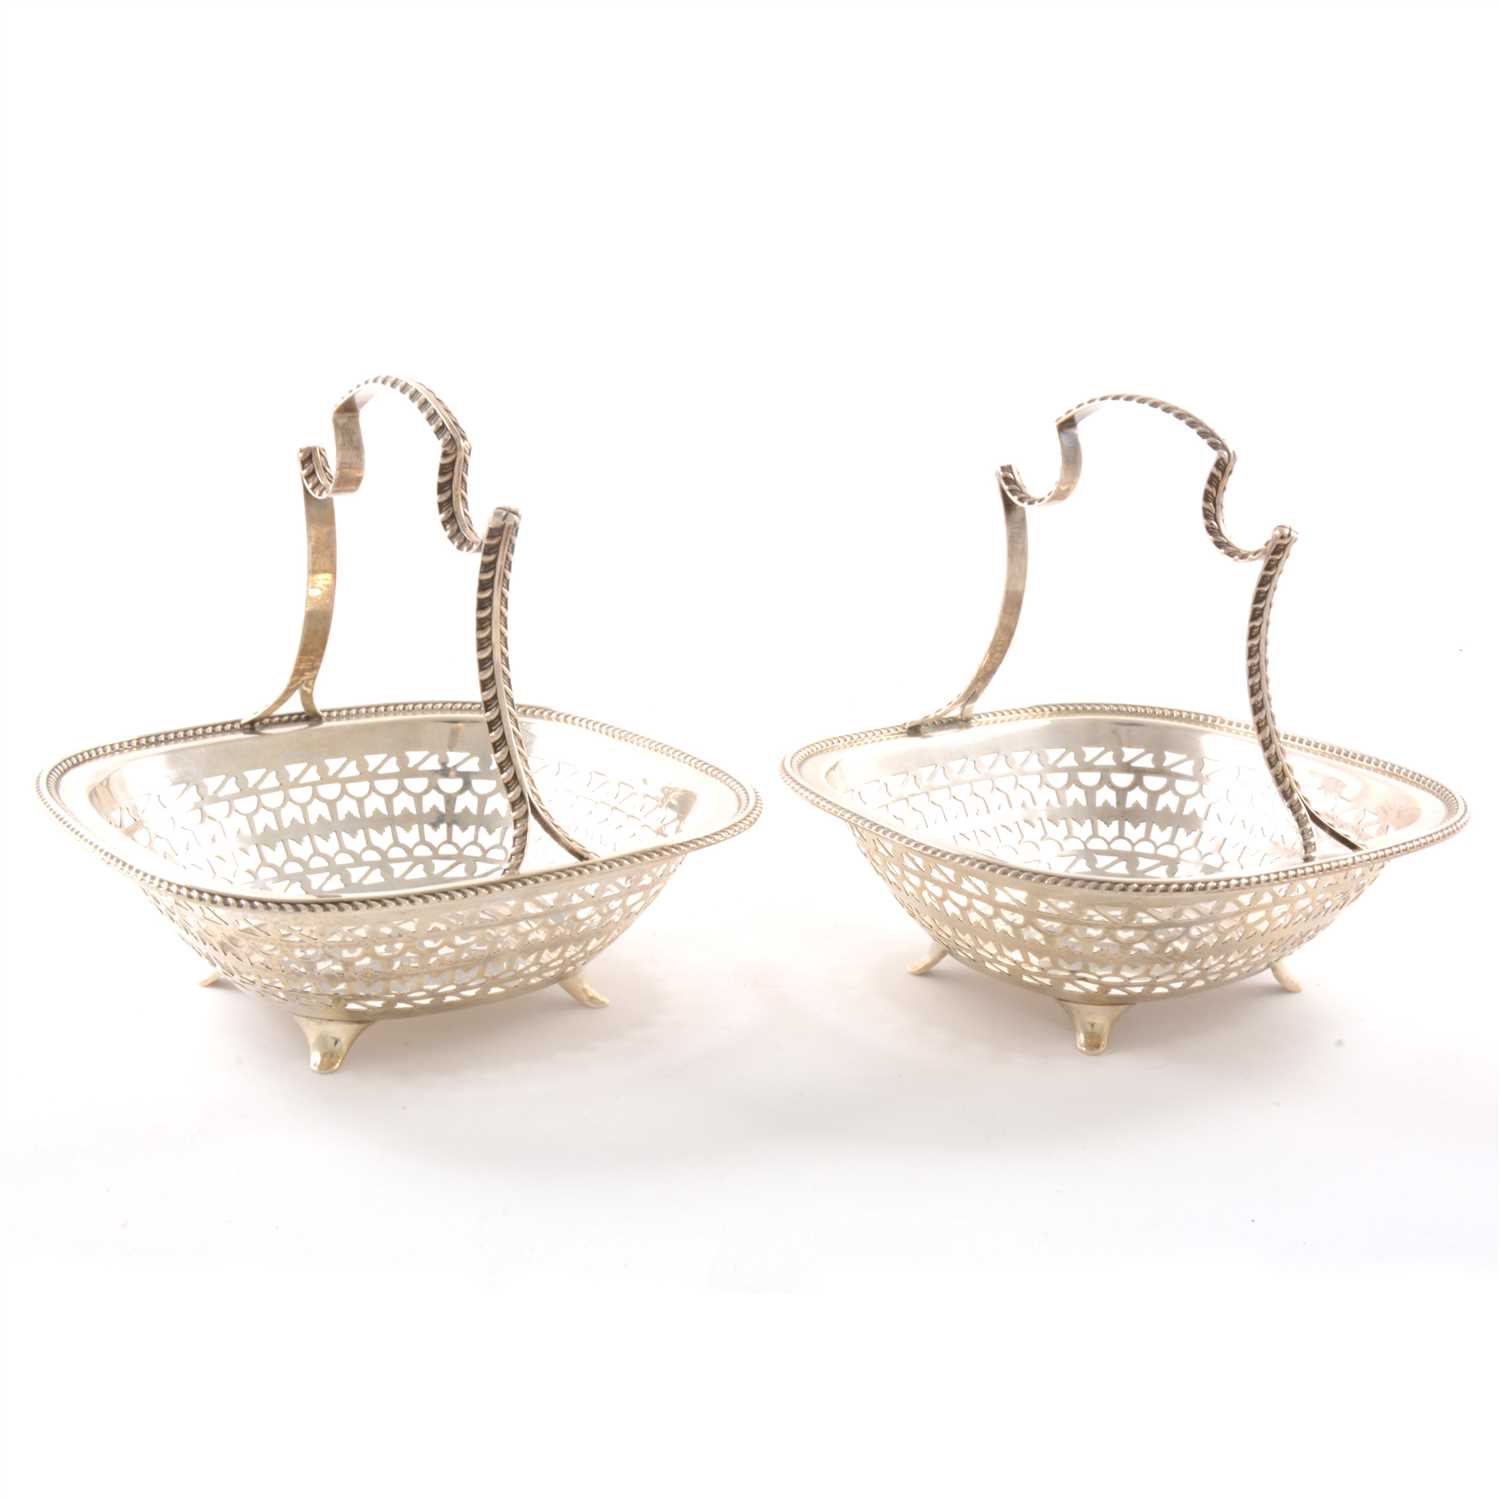 Lot 125 - Pair of silver sweetmeat baskets, Martin Hall & Co, Sheffield 1911-12